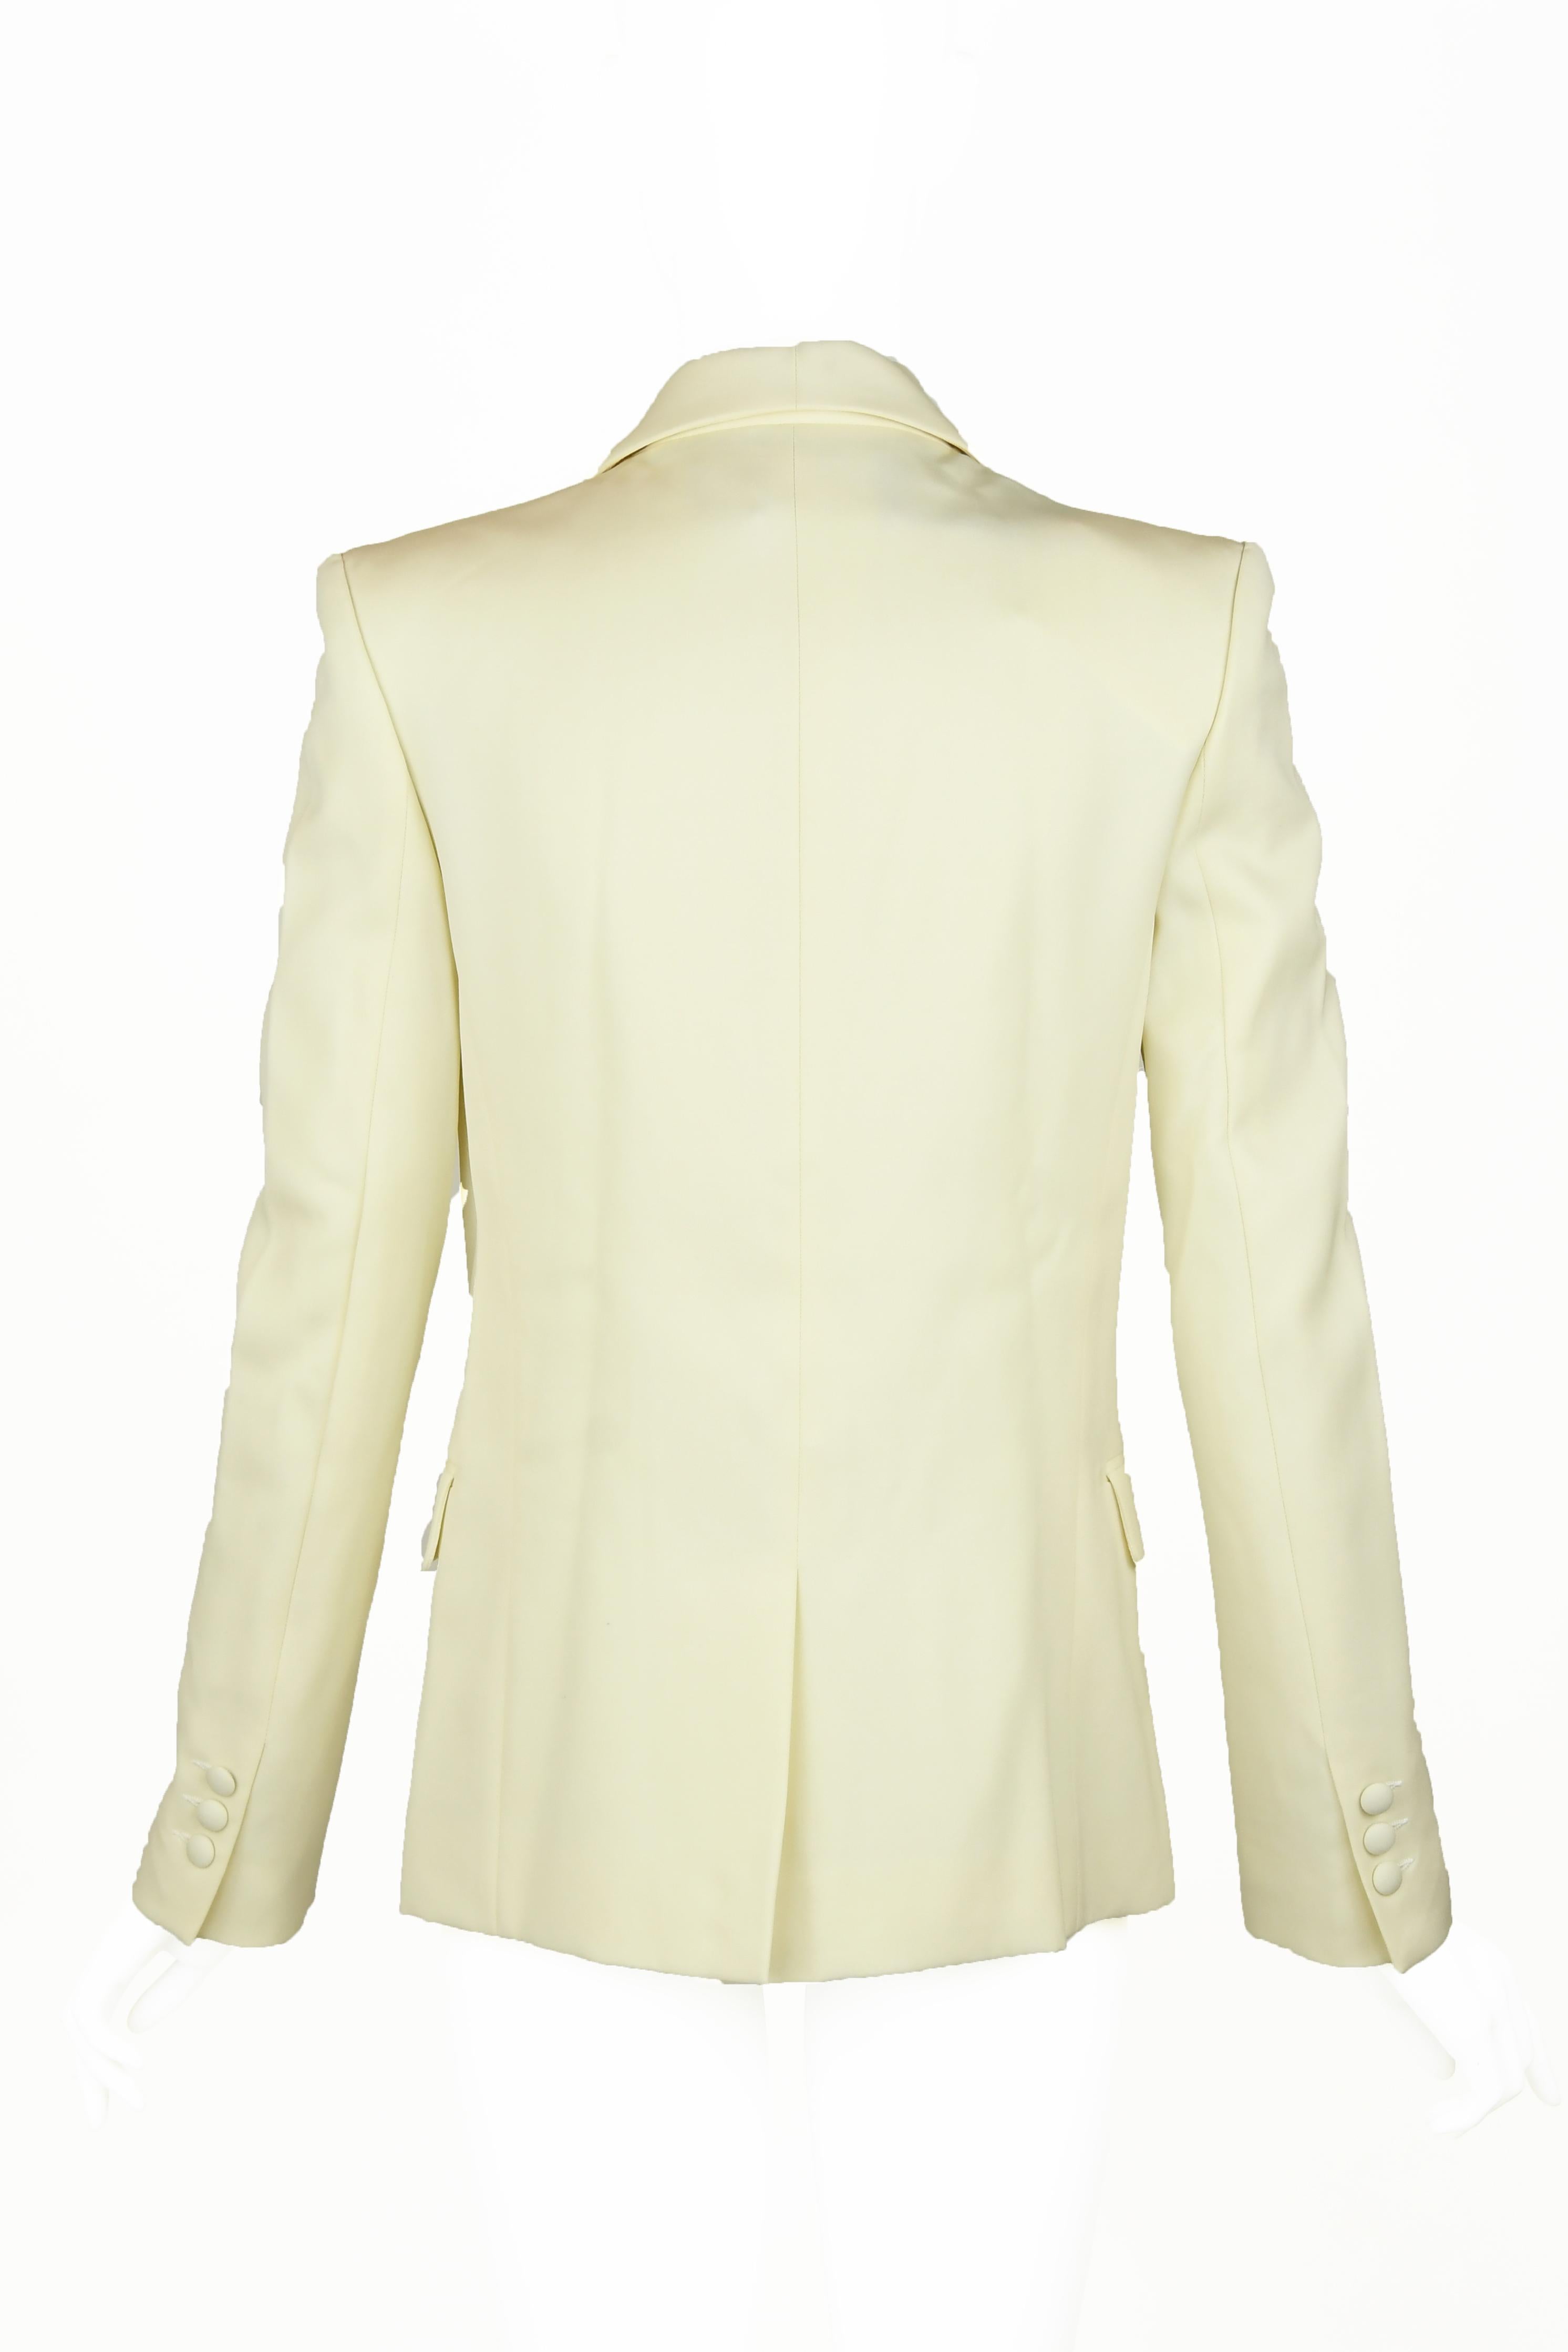 A boxier fit to this Balmain off white shawl collar blazer.  Beautiful and classic, looks great with jeans or dressed up.

Size: FR 34

Condition: Excellent

Composition: 100% wool / lining 52% viscose, 48% cotton

Made in France